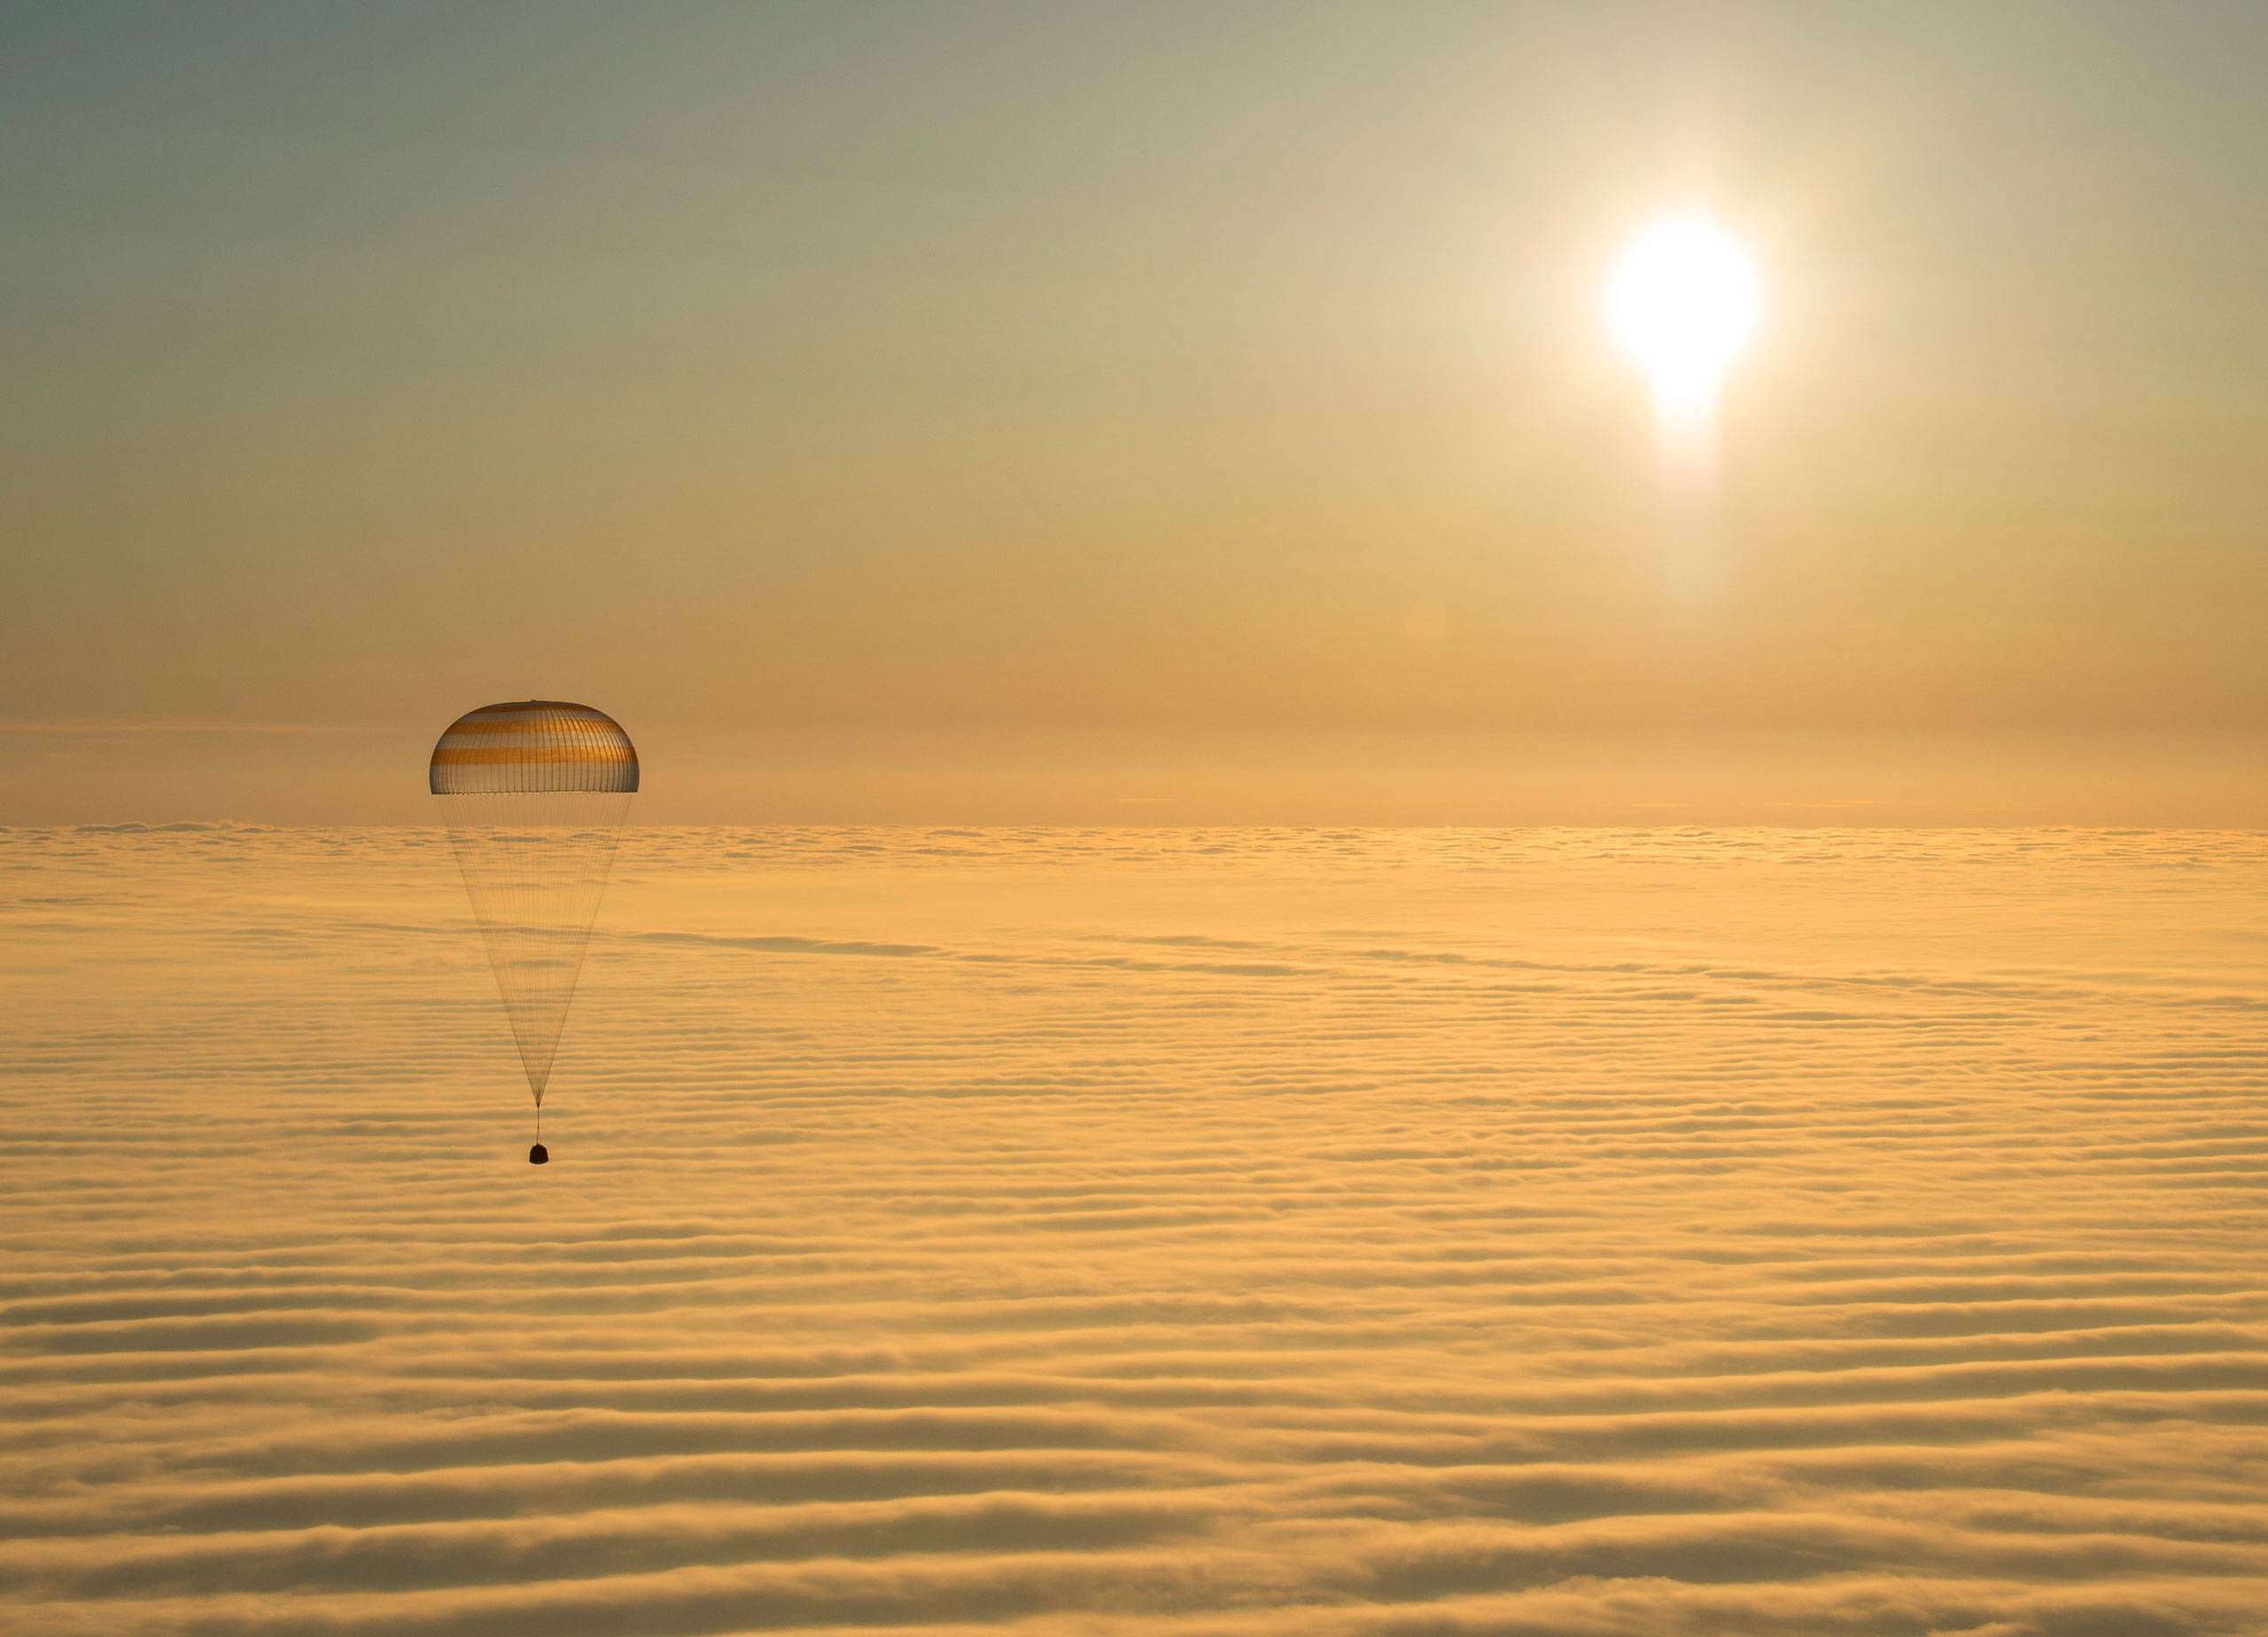 The Soyuz TMA-14M spacecraft as it lands with Expedition 42 commander Barry Wilmore of NASA, Alexander Samokutyaev of the Russian Federal Space Agency (Roscosmos) and Elena Serova of Roscosmos near the town of Zhezkazgan, Kazakhstan on March 12, 2015. (Bill Ingalls—NASA)